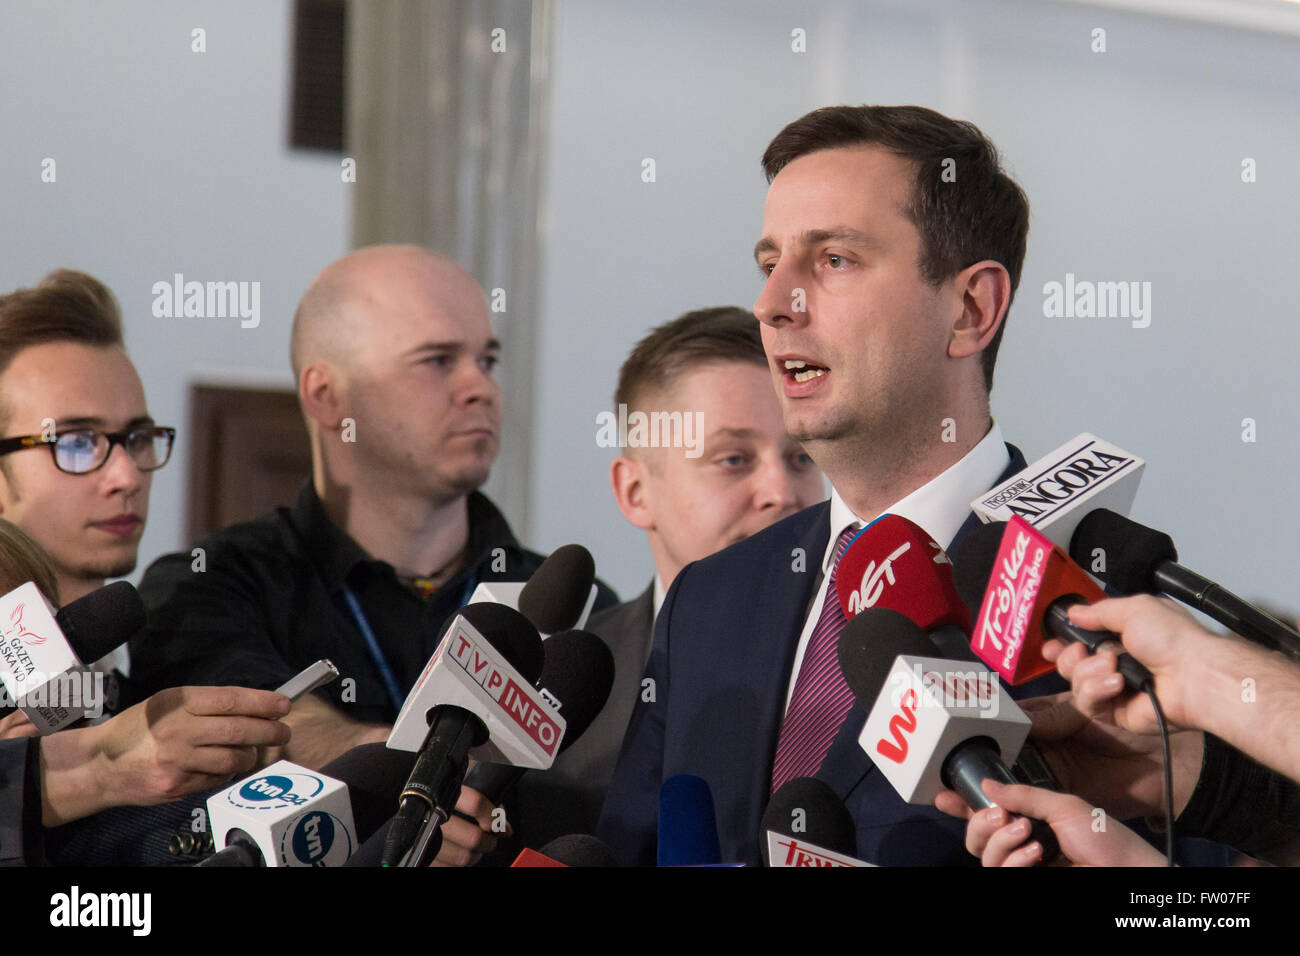 Warsaw, Poland. 31st Mar, 2016. Leader of Polish People's Party (PSL), Wladyslaw Kosiniak-Kamysz during a press conference after meeting of leaders of eight polish political parties in a bid to resolve Poland's constitutional crisis. © Mateusz Wlodarczyk/Pacific Press/Alamy Live News Stock Photo